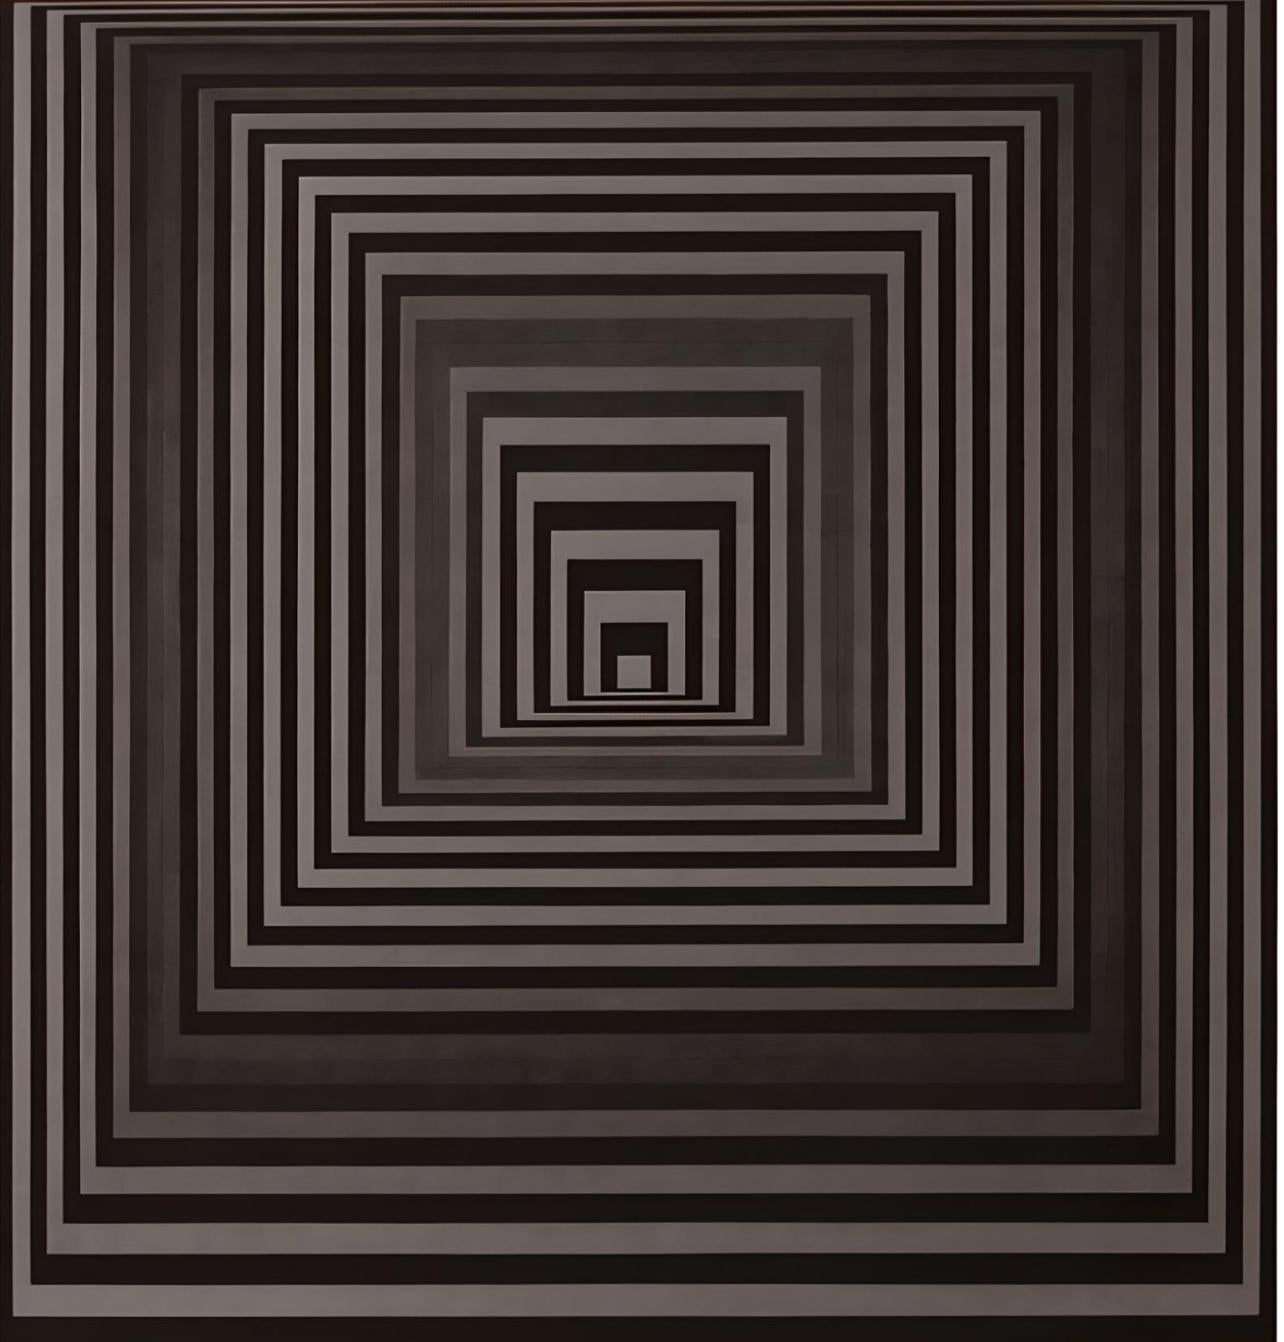 Vasarely, Composition, VONAL (after) - Print by Victor Vasarely